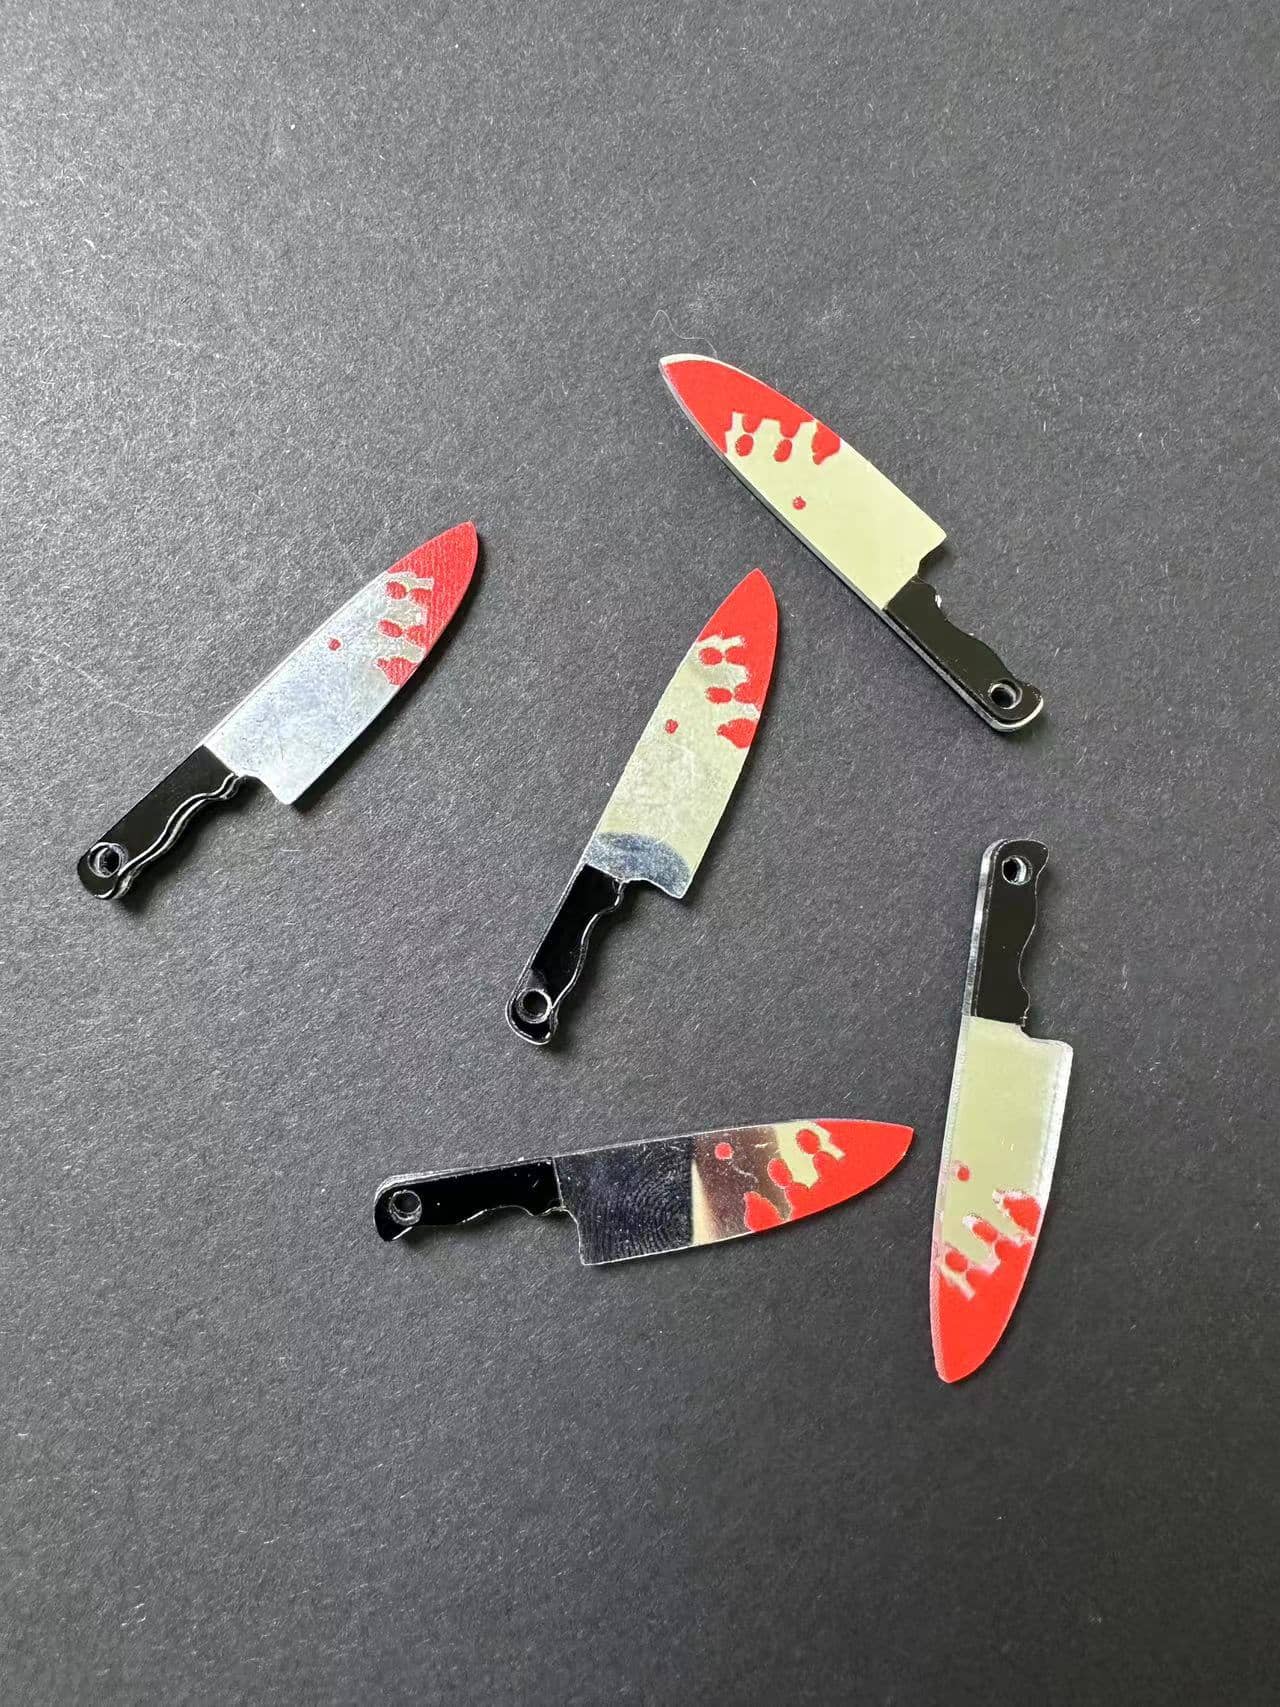 Resin knife (Not for sale, only for display)